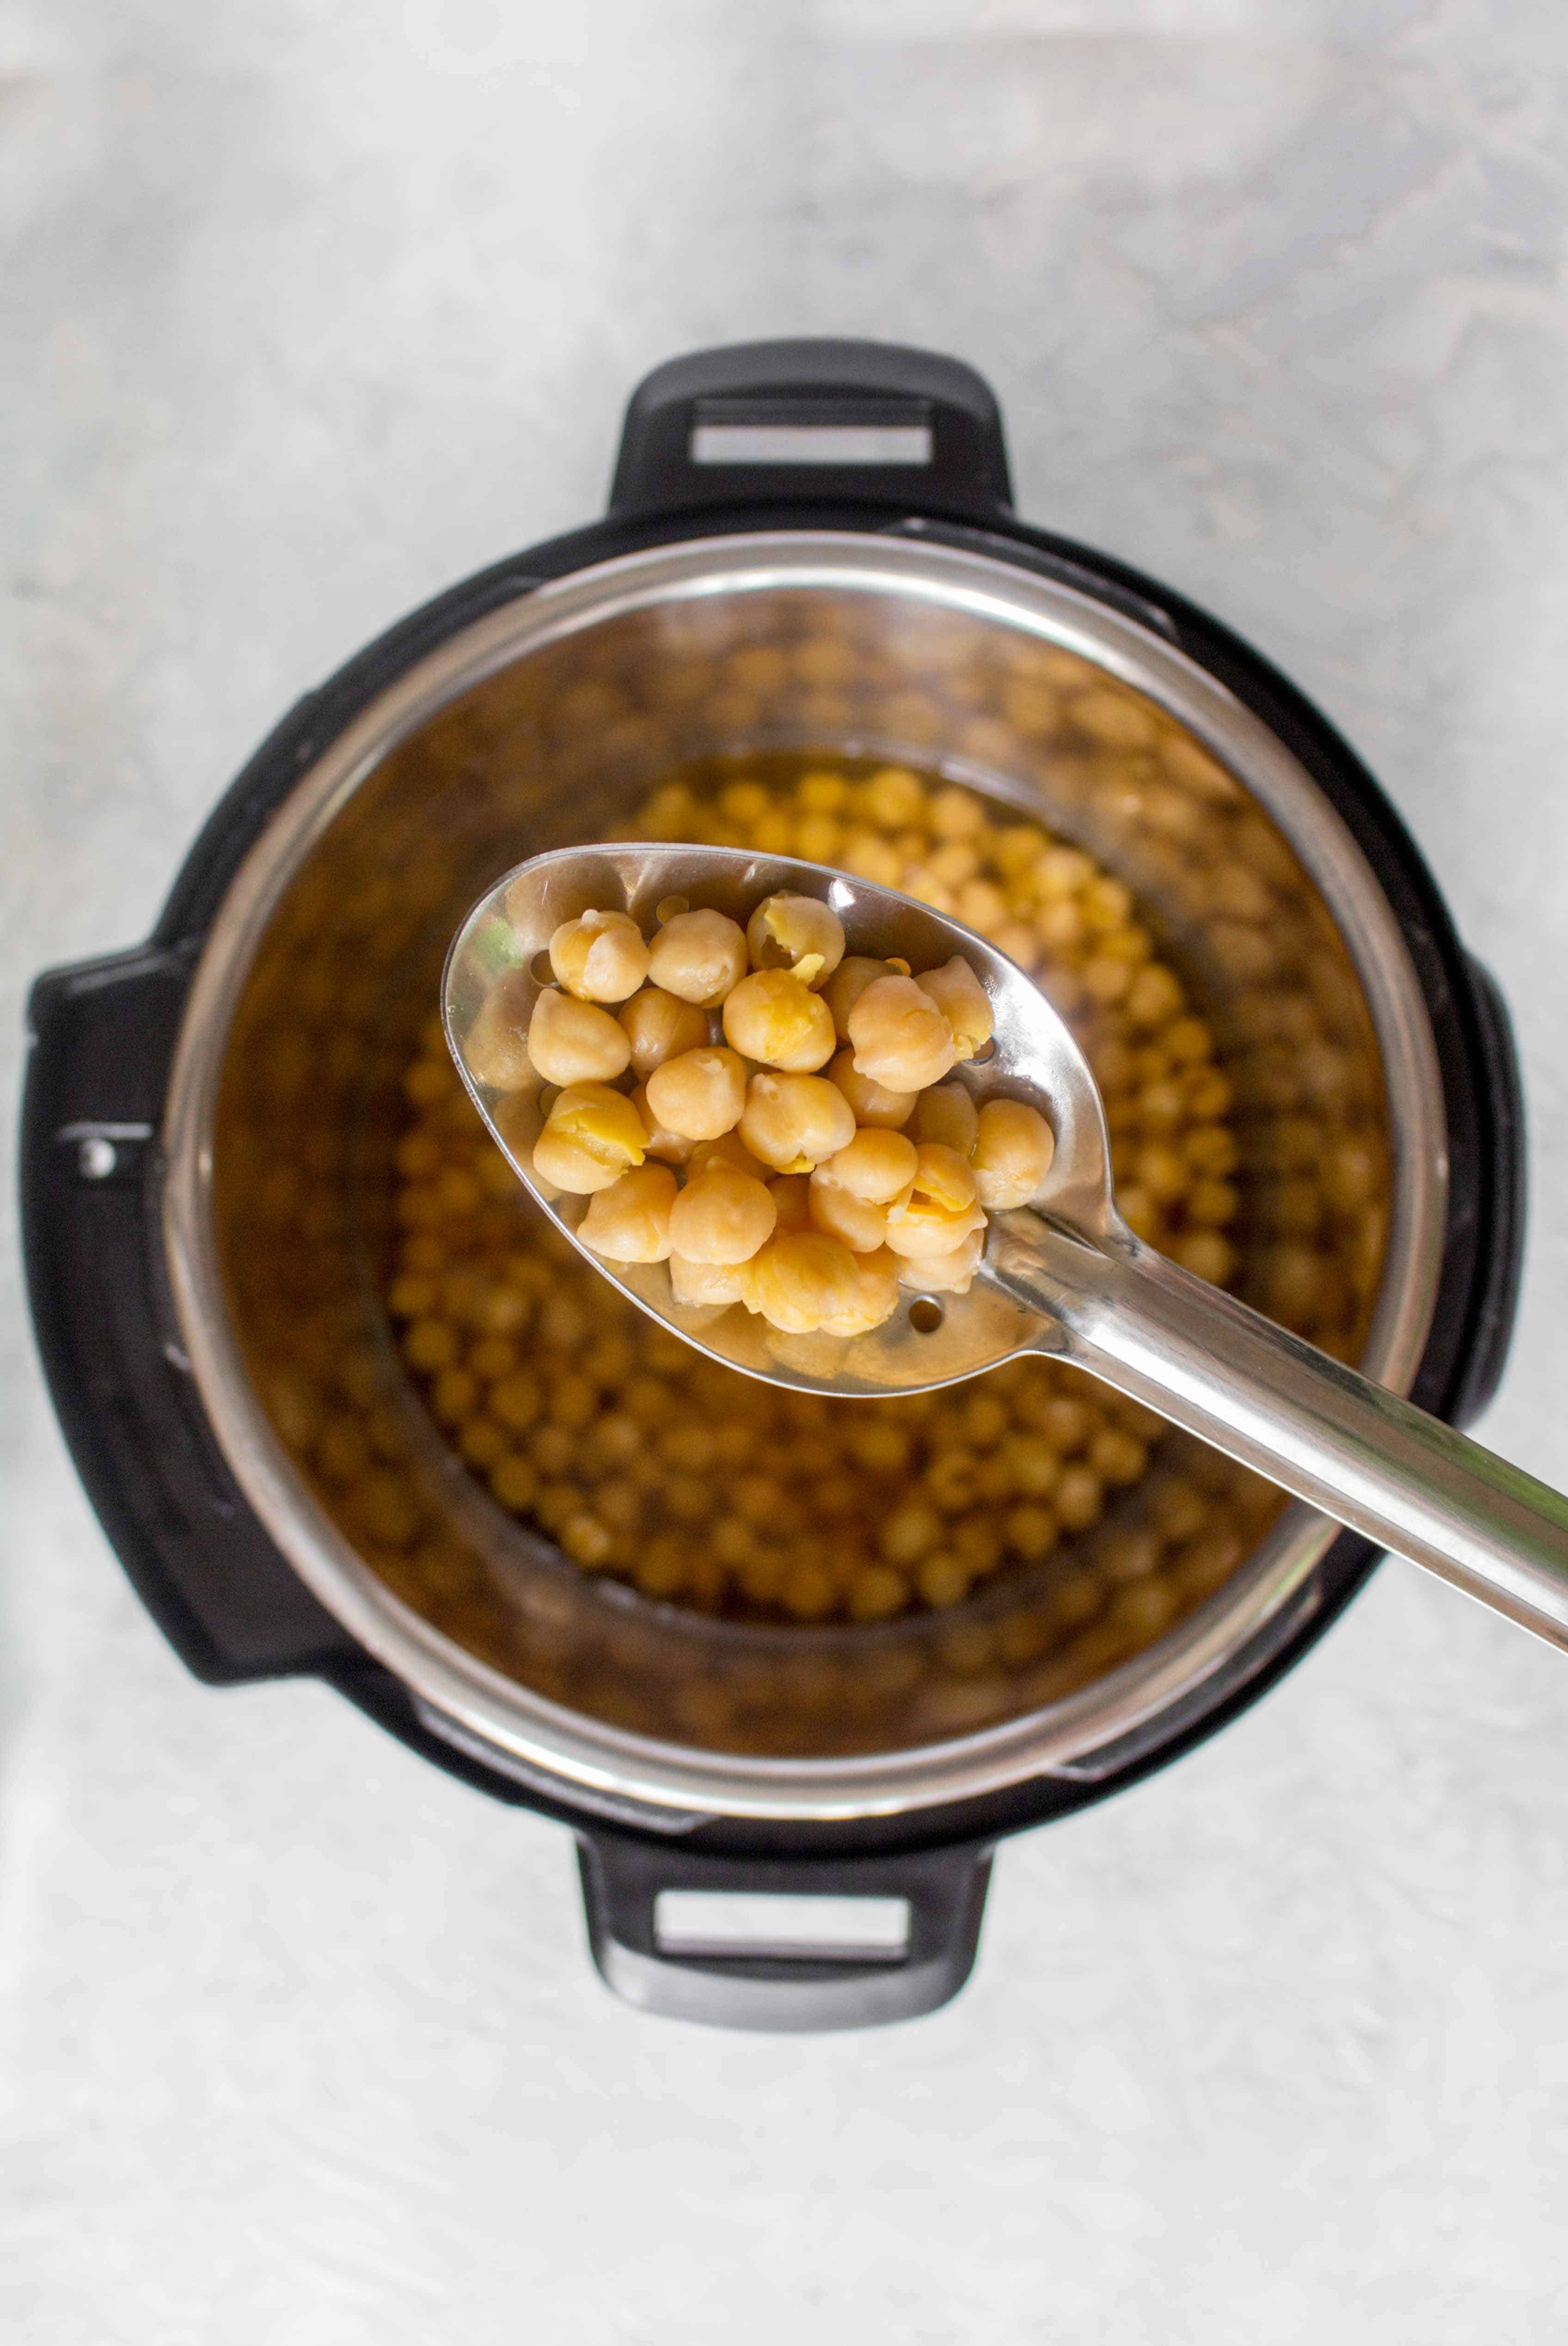 Why Use The Instant Pot To Make Chickpeas for Hummus